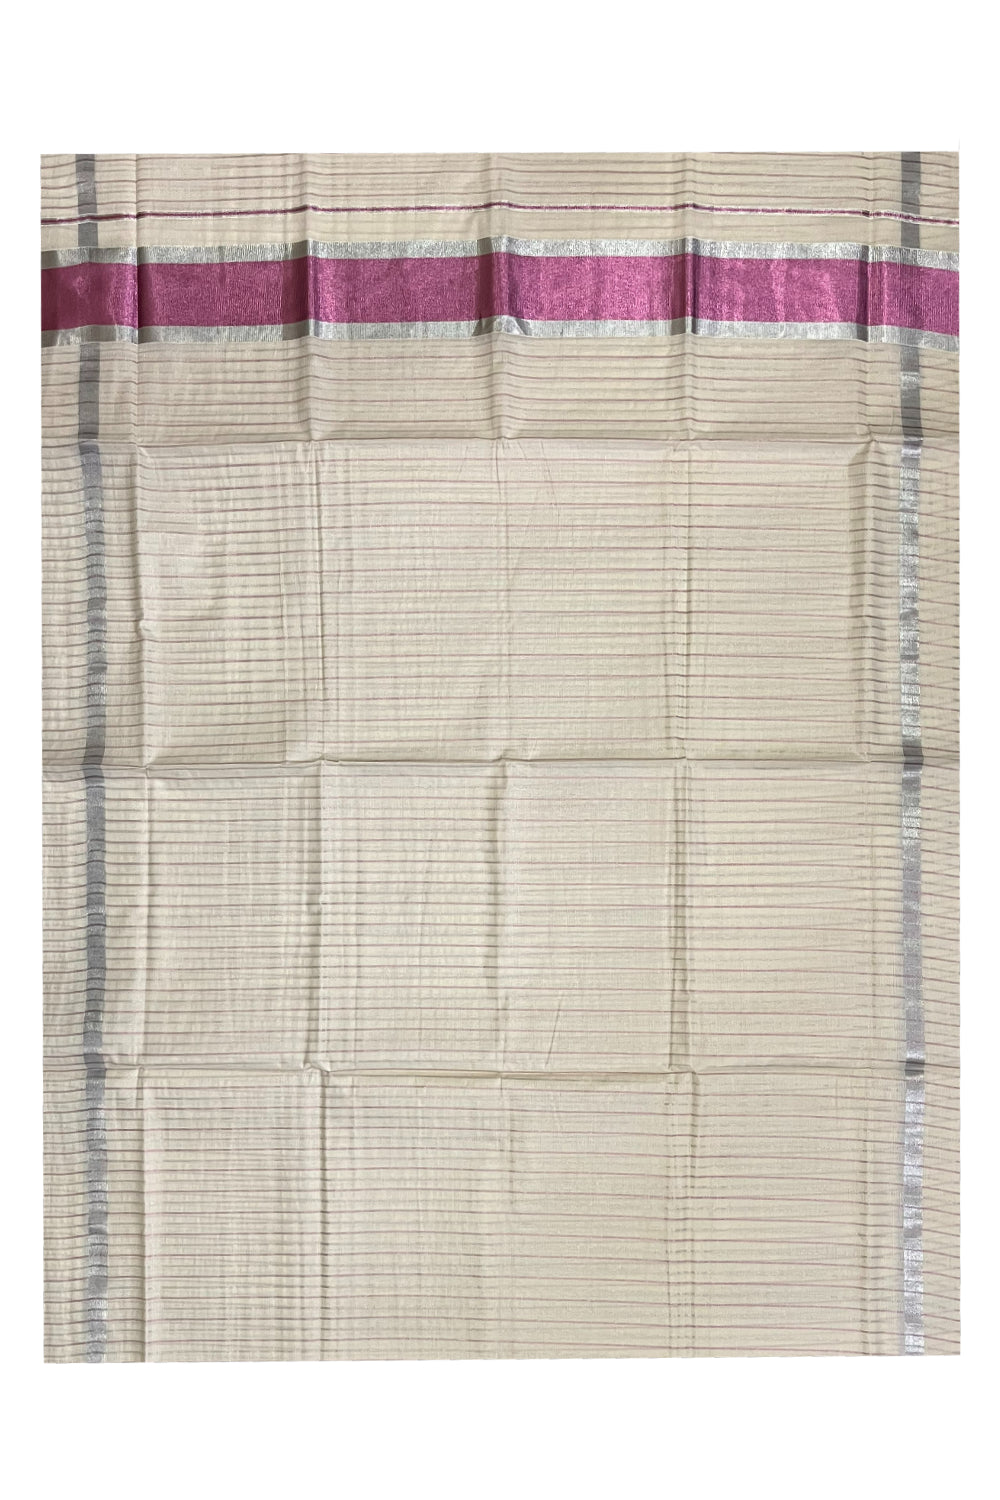 Pure Cotton Kerala Saree with Silver and Pink Kasavu Lines Across Body